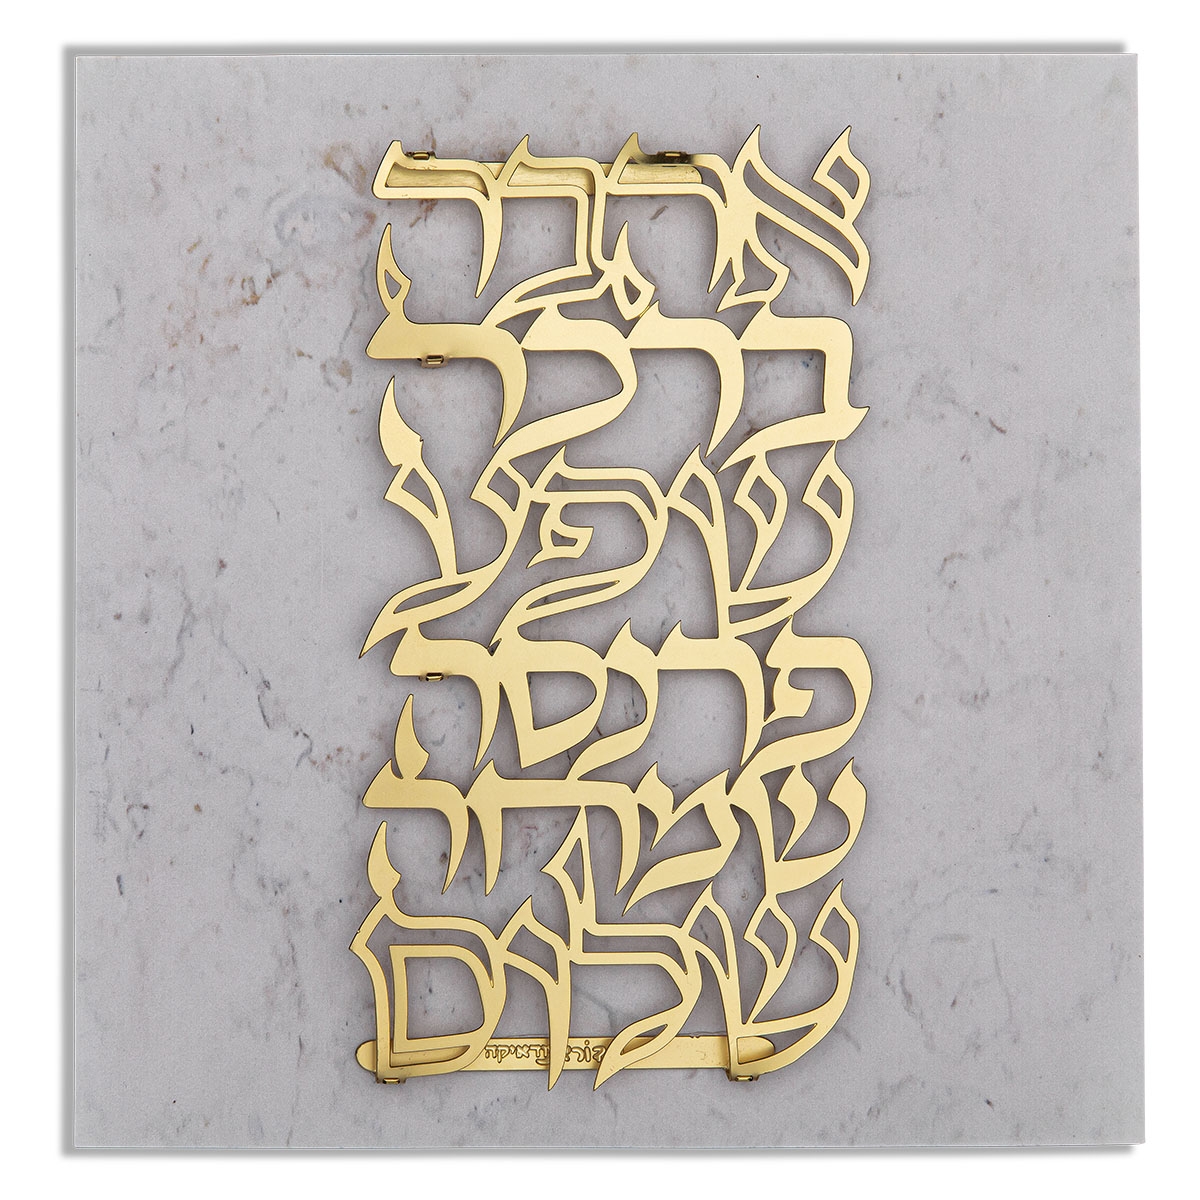 Designer Gold-Plated Floating Letters Wall Hanging – Blessings For